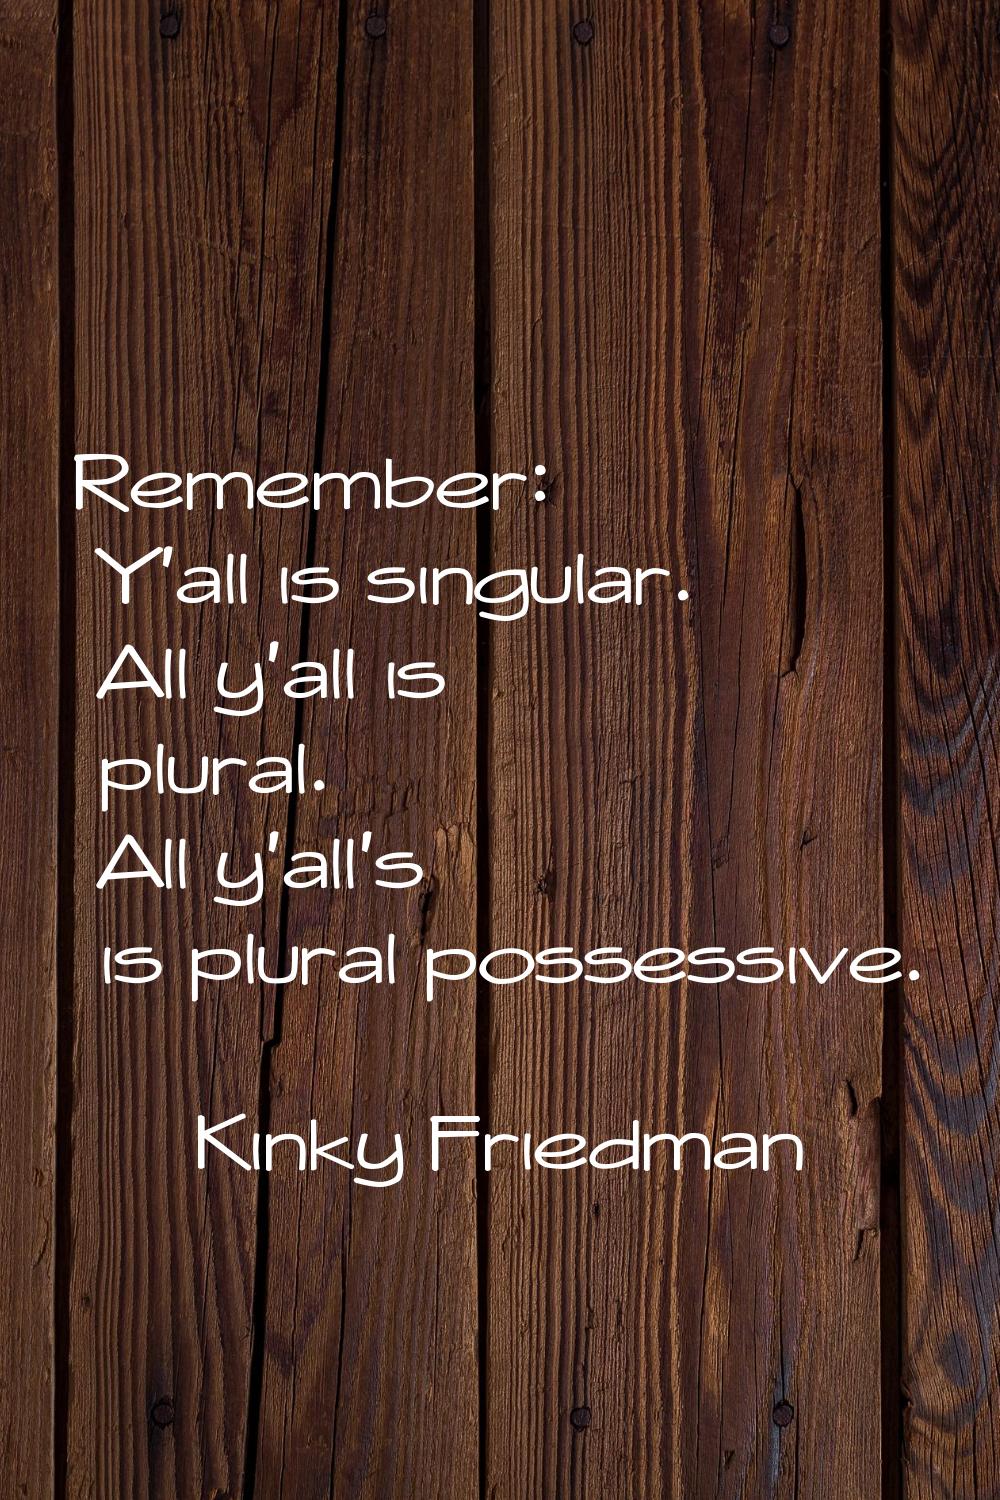 Remember: Y'all is singular. All y'all is plural. All y'all's is plural possessive.